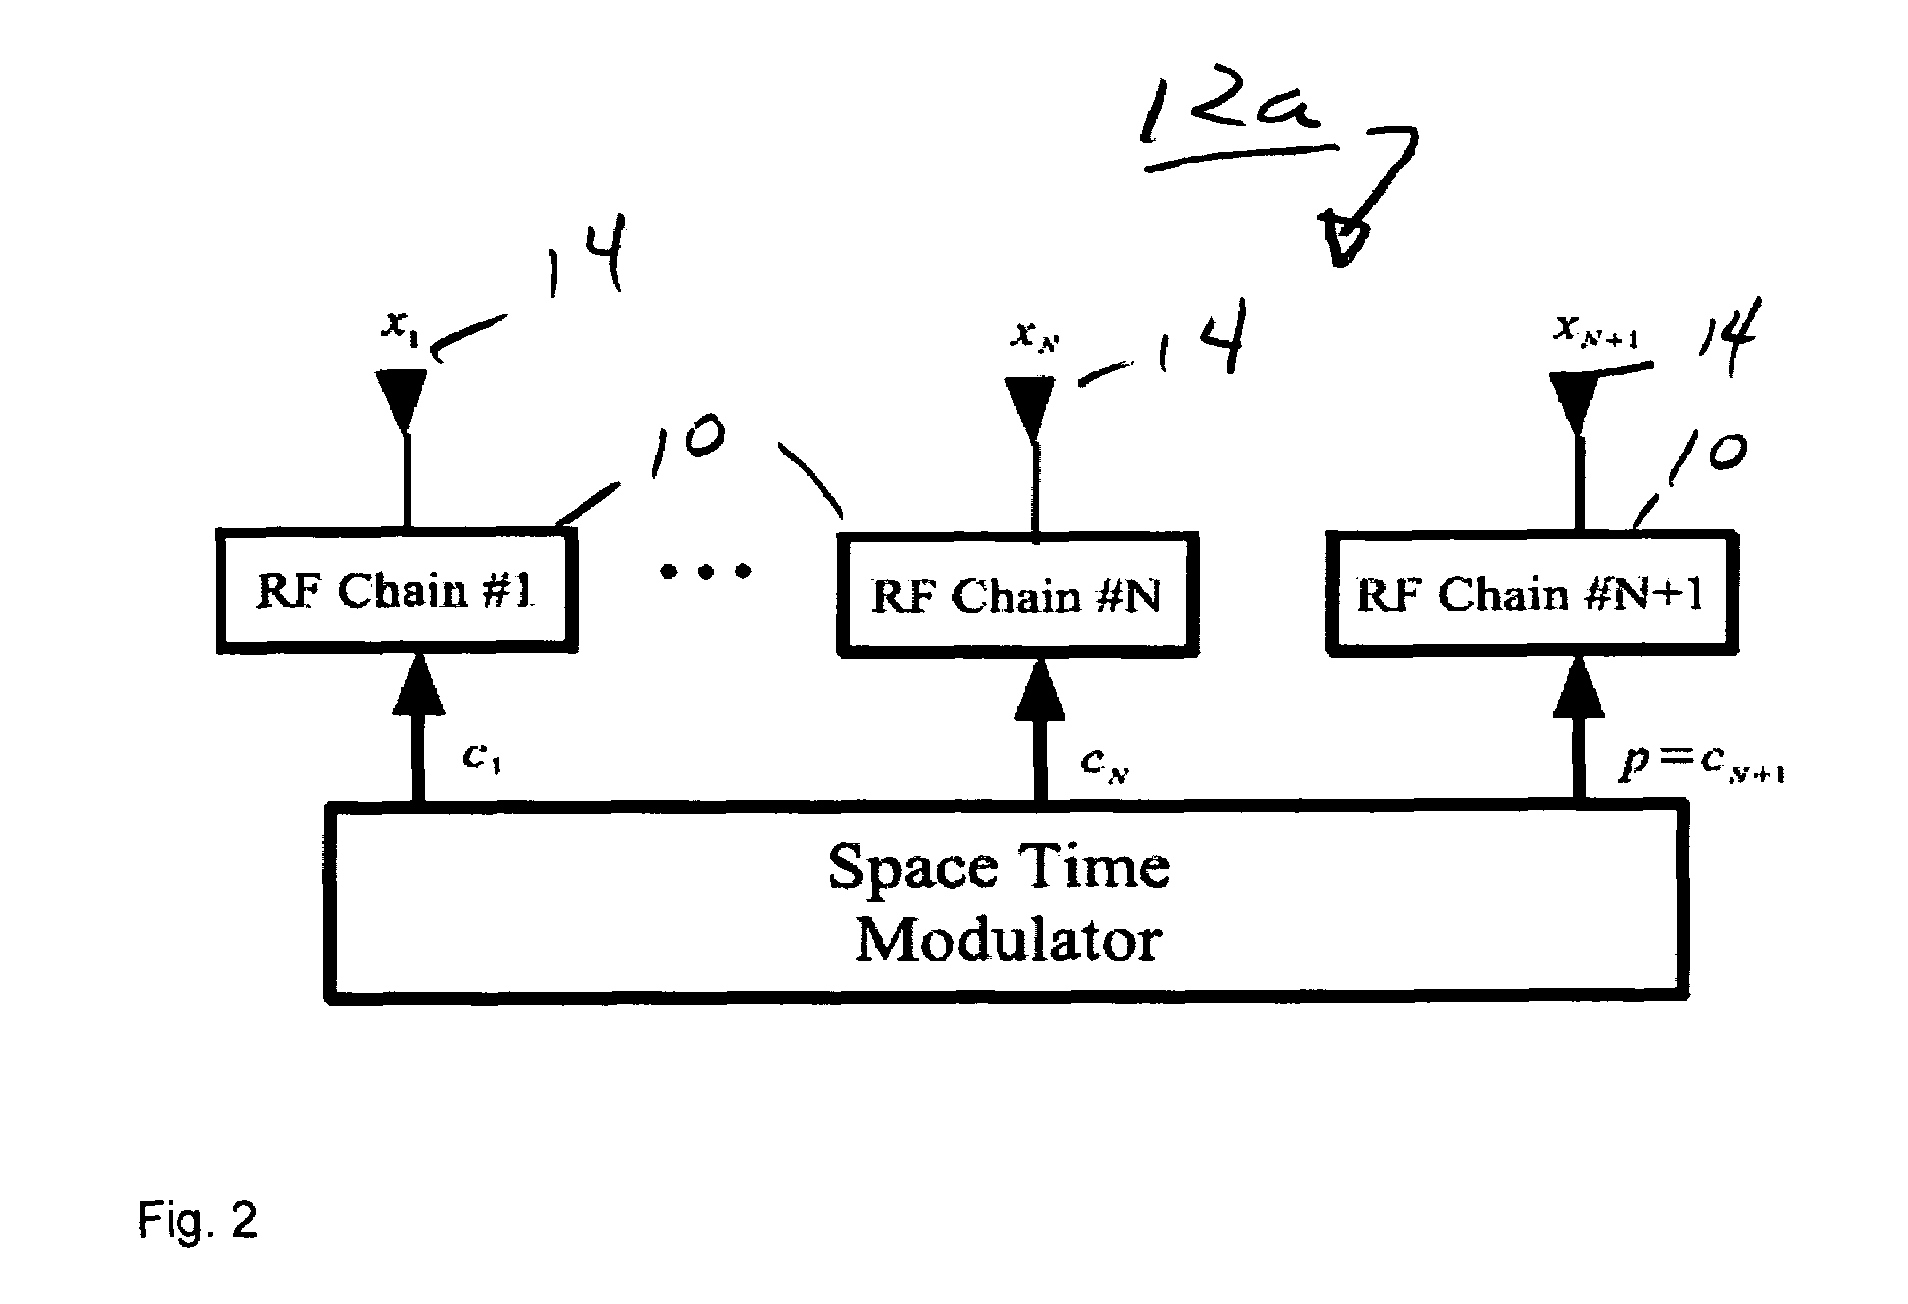 Apparatus and method for a system architecture for multiple antenna wireless communication systems using round robin channel estimation and transmit beam forming algorithms